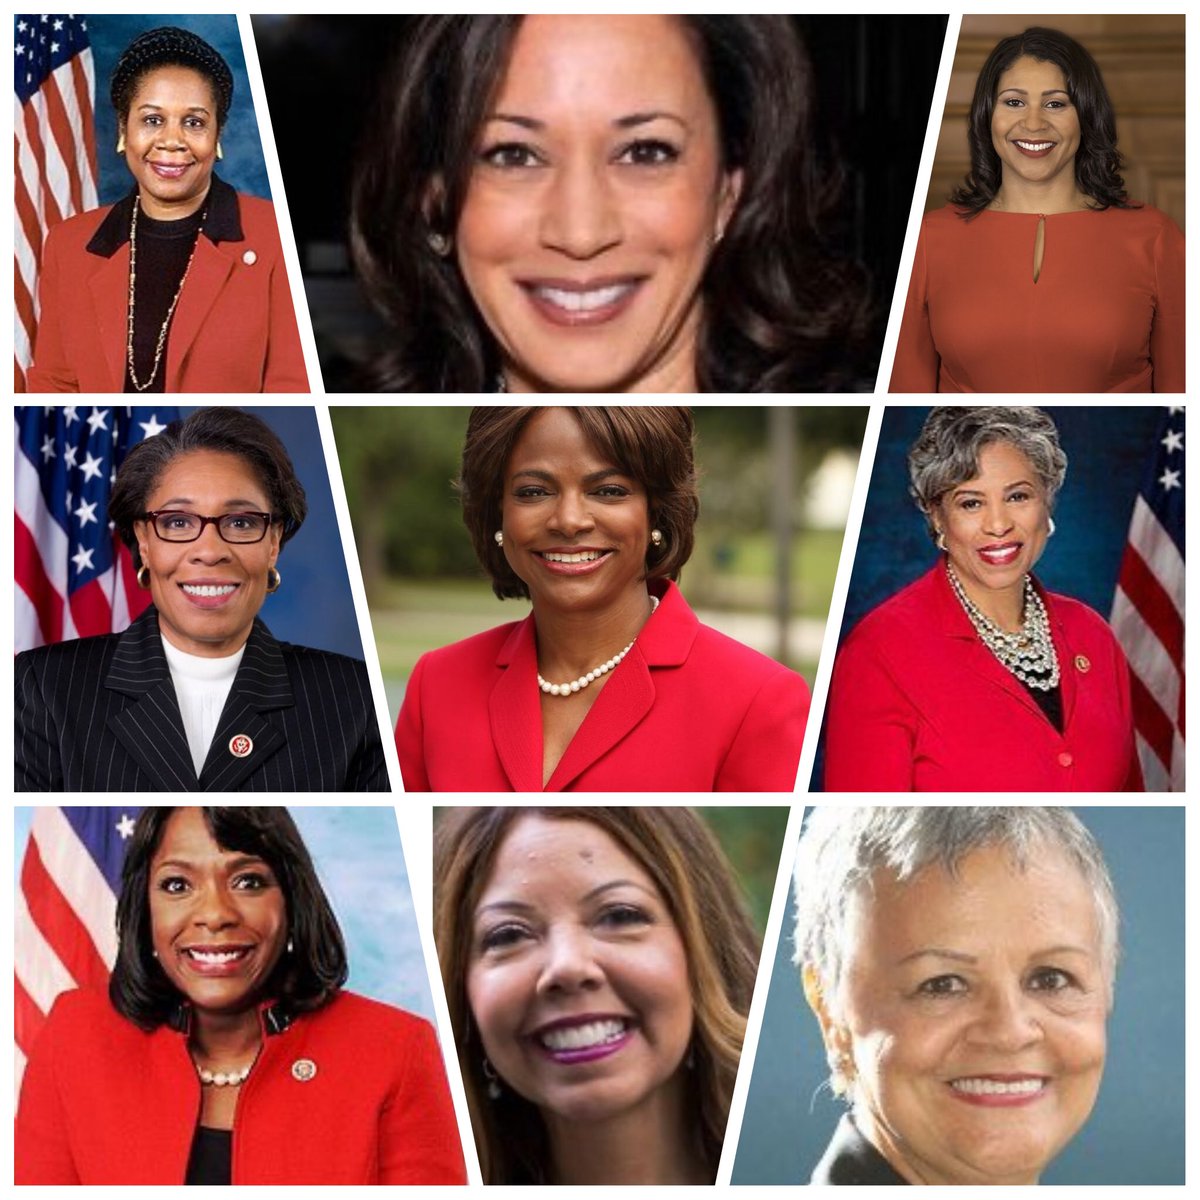 Thread: A continuation of  @blackwomenviews amplifying leading roles Black women elected officials play in U.S. government. They face daily racial & gender discrimination, but failure is not an option. In  #COVID19 their work is pivotal.  #BlackWomenLead 1/10